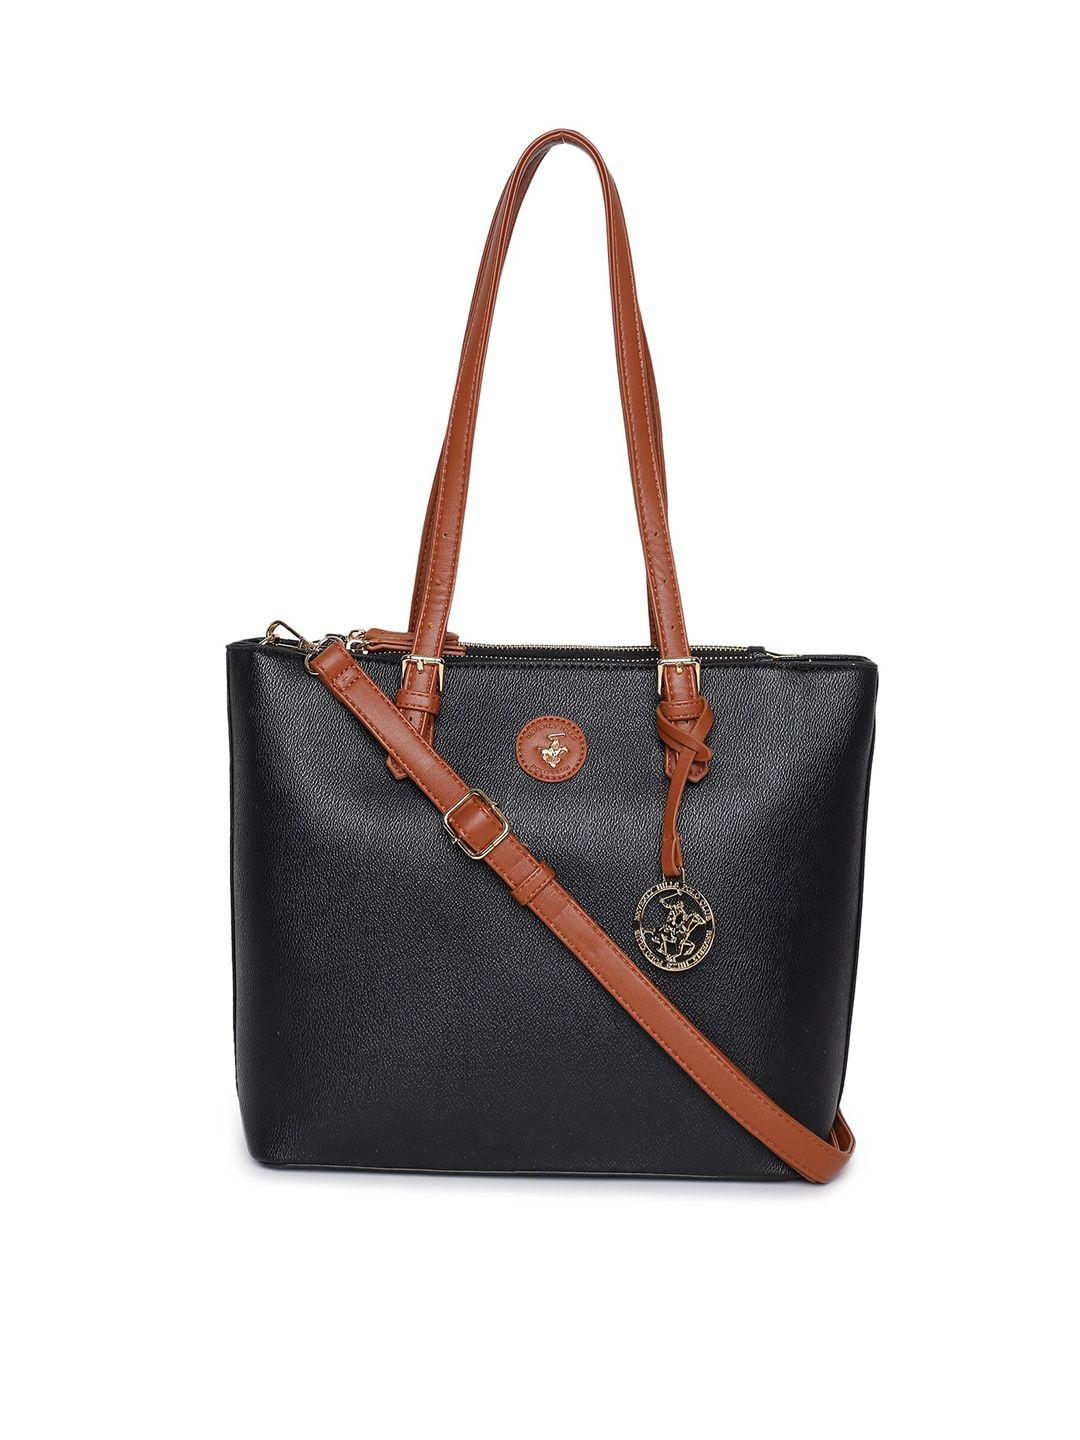 beverly hills polo club shoulder bag with tasselled